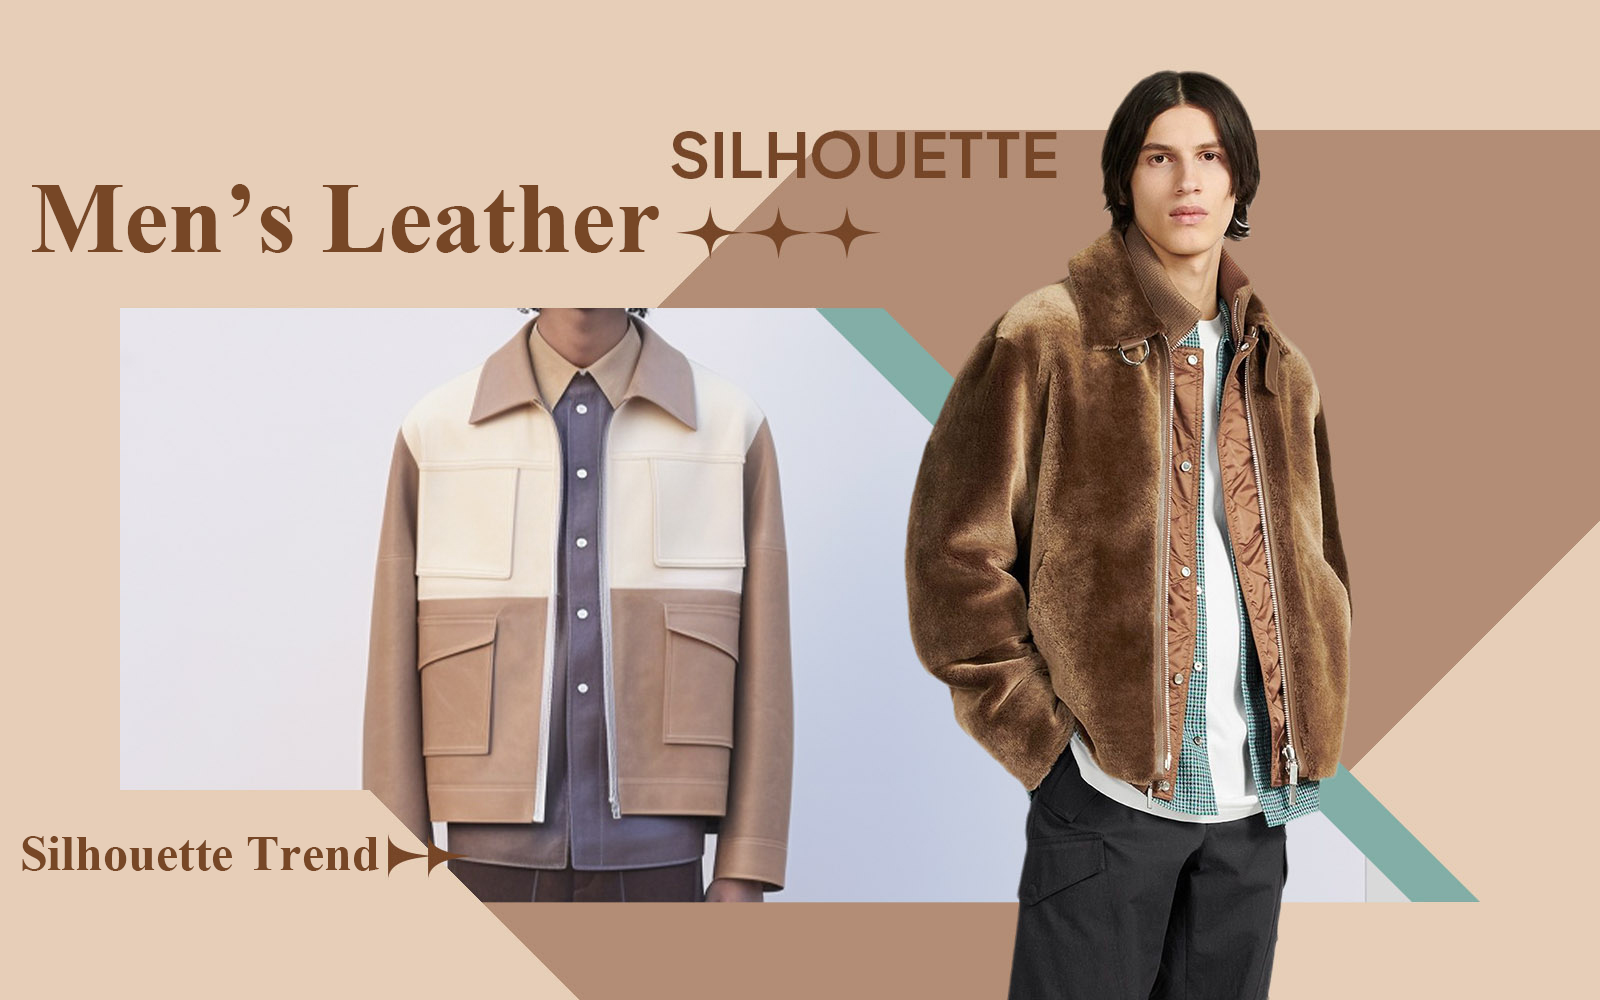 Business Commuting -- The Silhouette Trend for Men's Leather